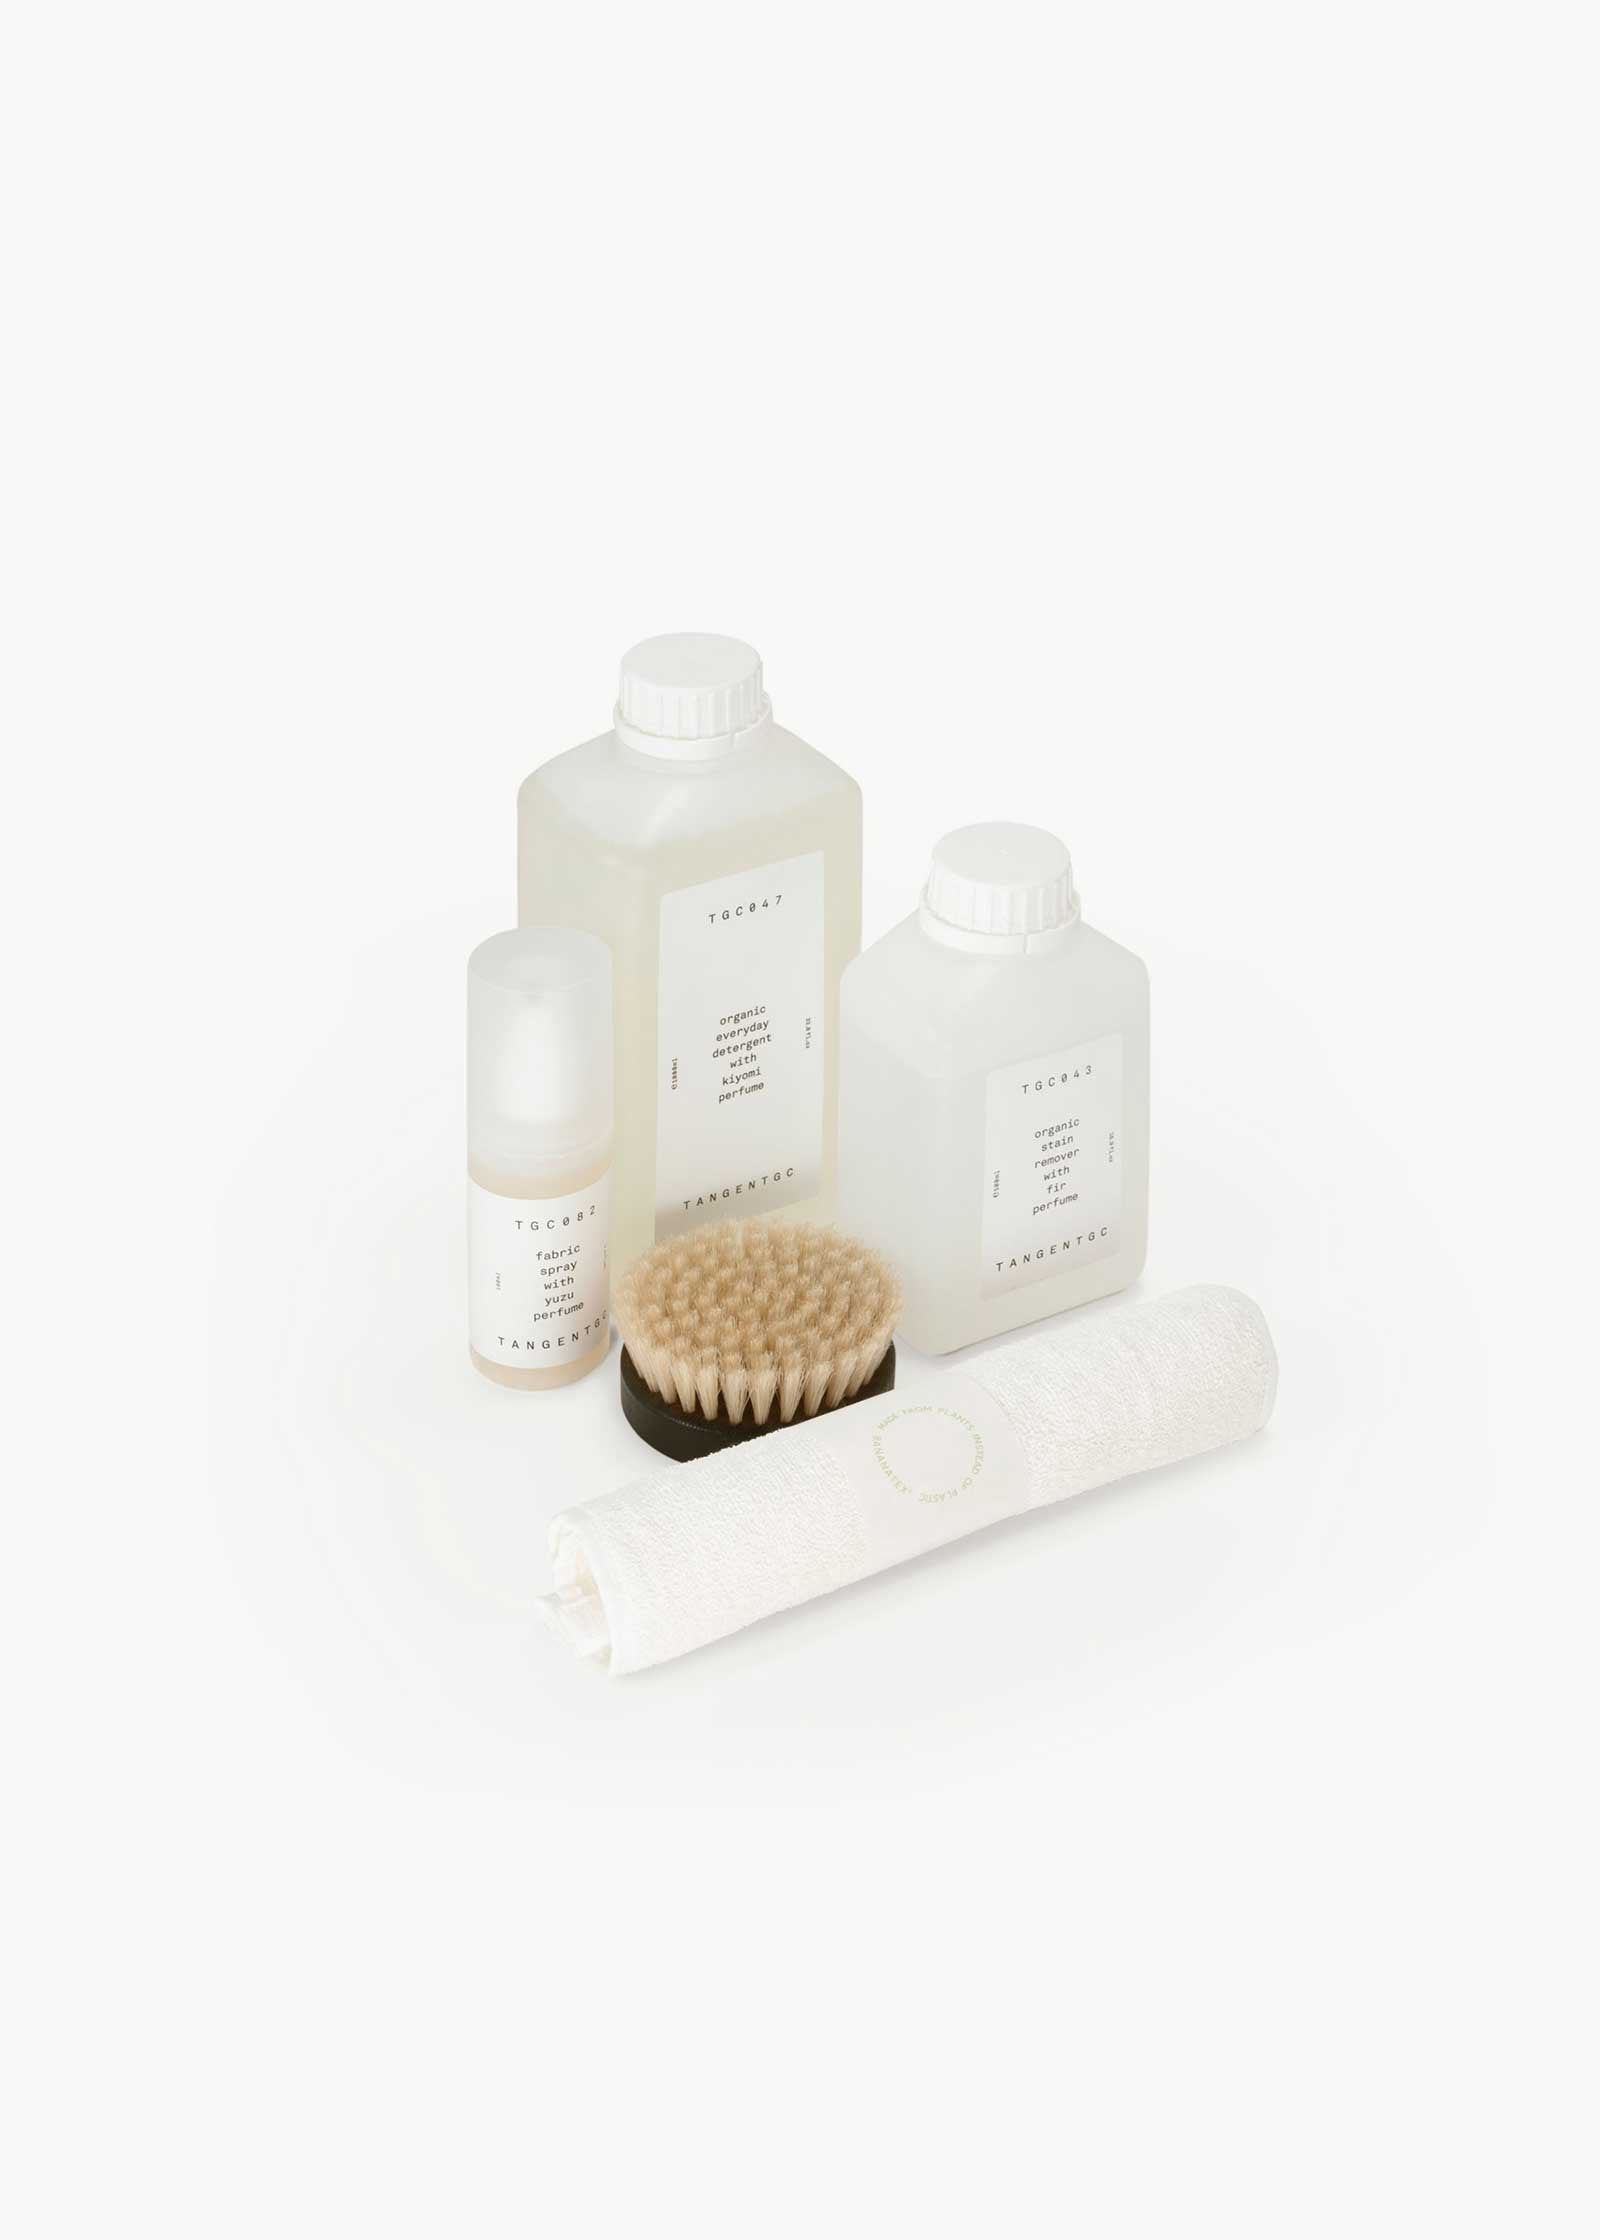 Clean & Care Set Deluxe – Care